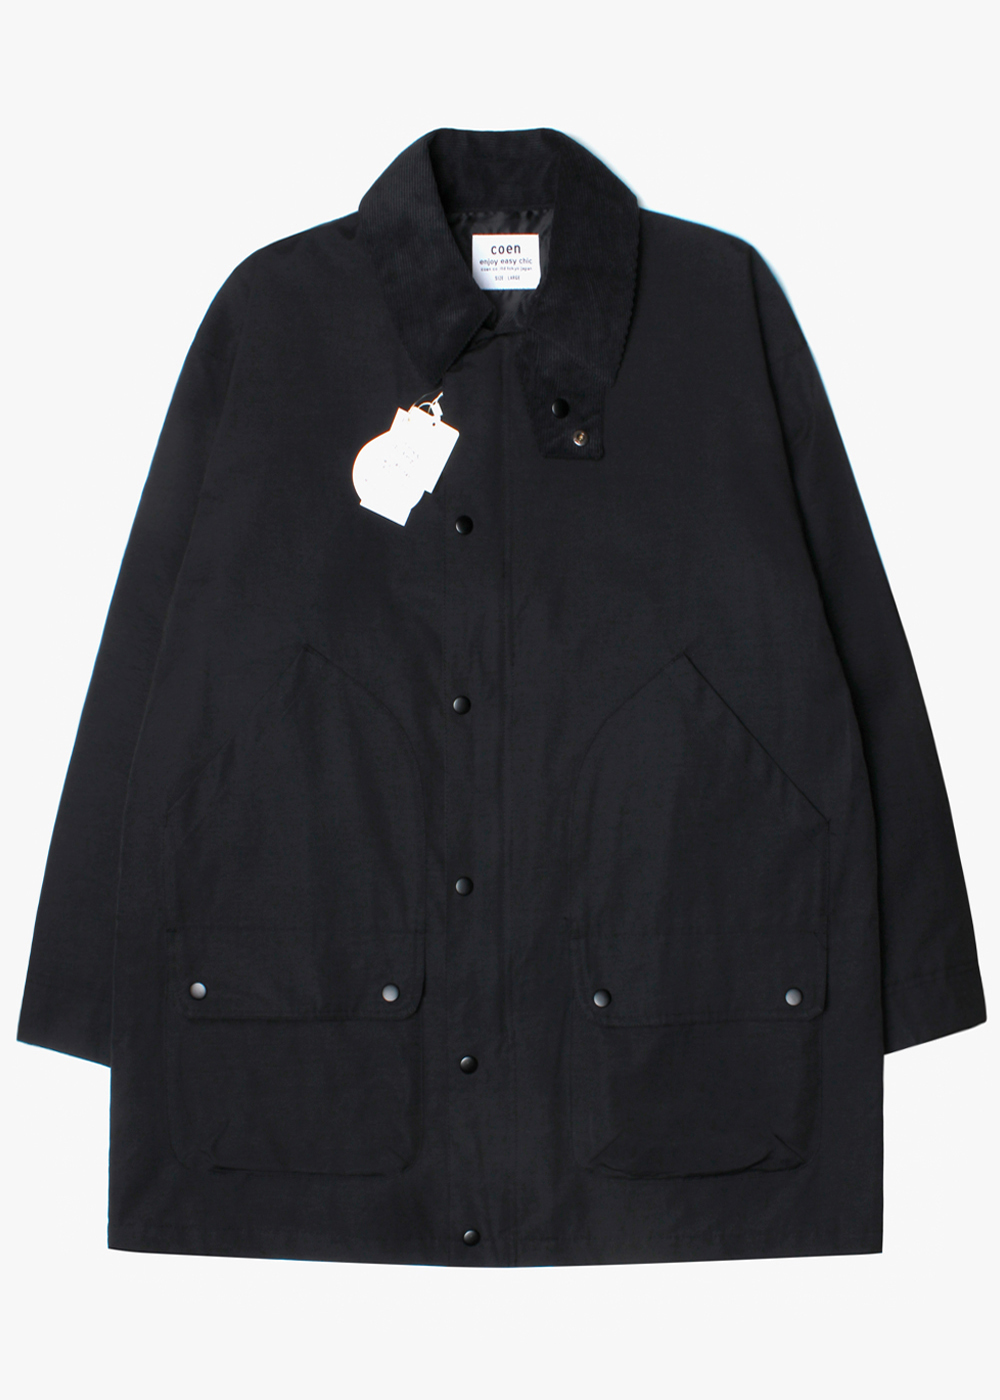 COEN BY UNITED ARROWS ‘over fit’nylon hunting jacket